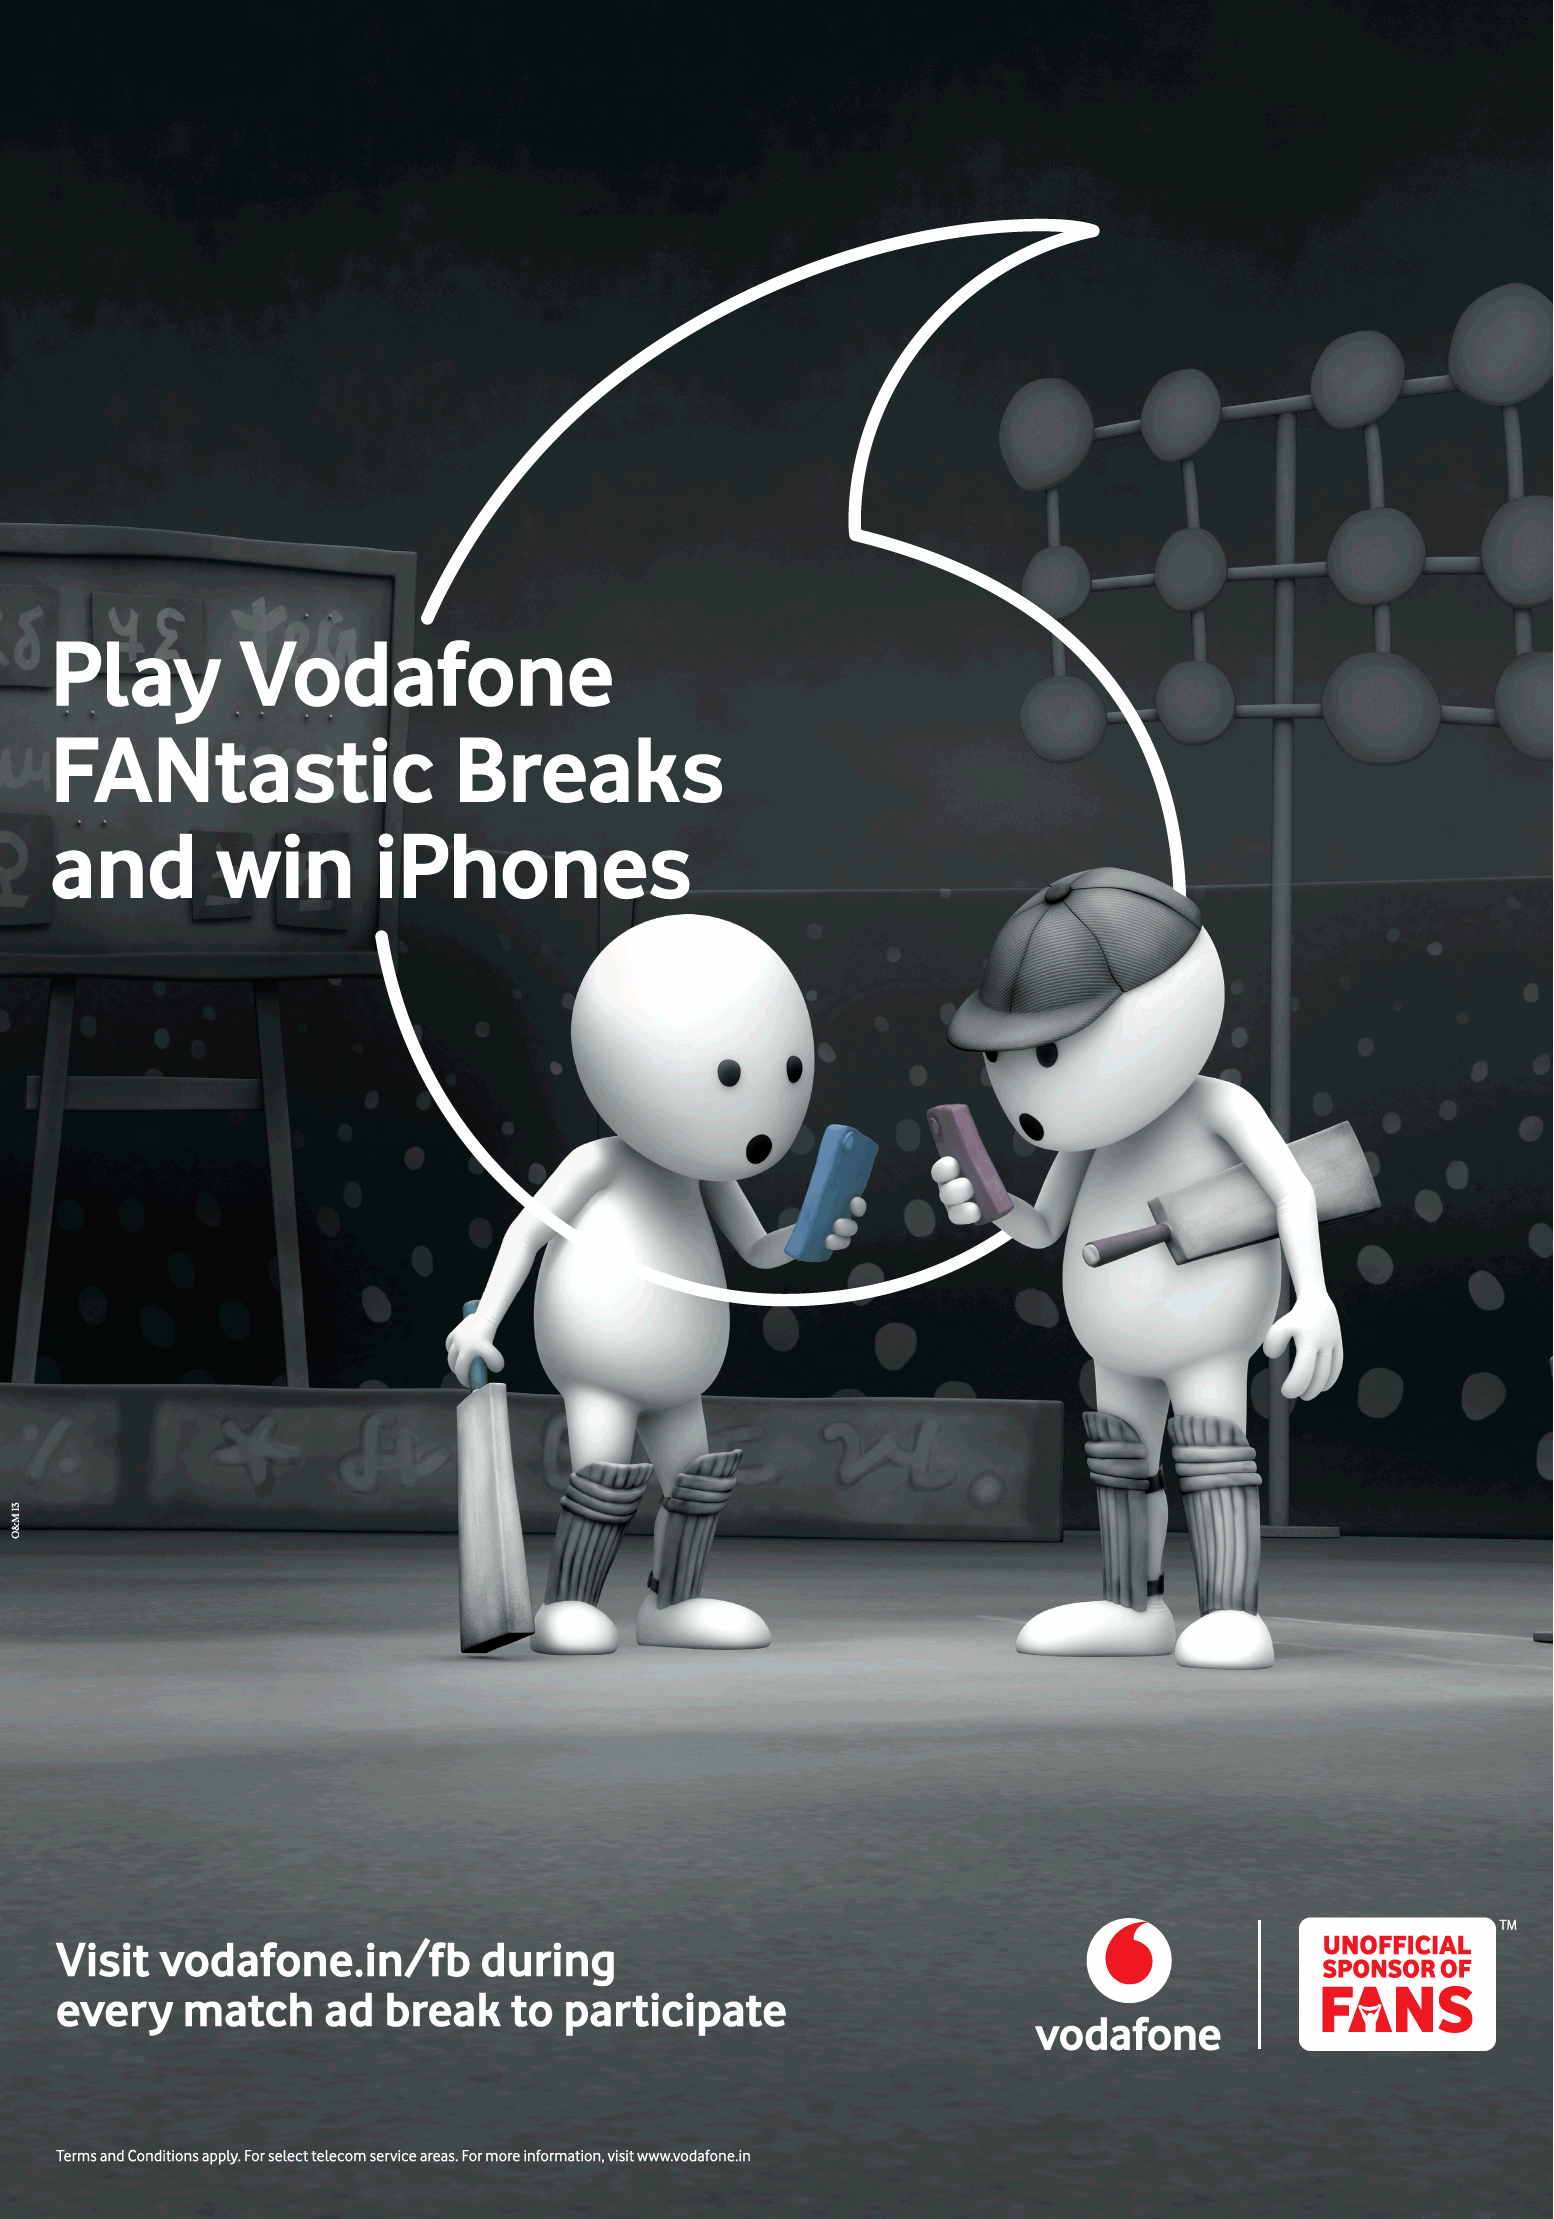 vodafone-unofficial-sponsor-of-fans-fantastic-breaks-and-win-iphones-ad-times-of-india-mumbai-09-04-2019.png